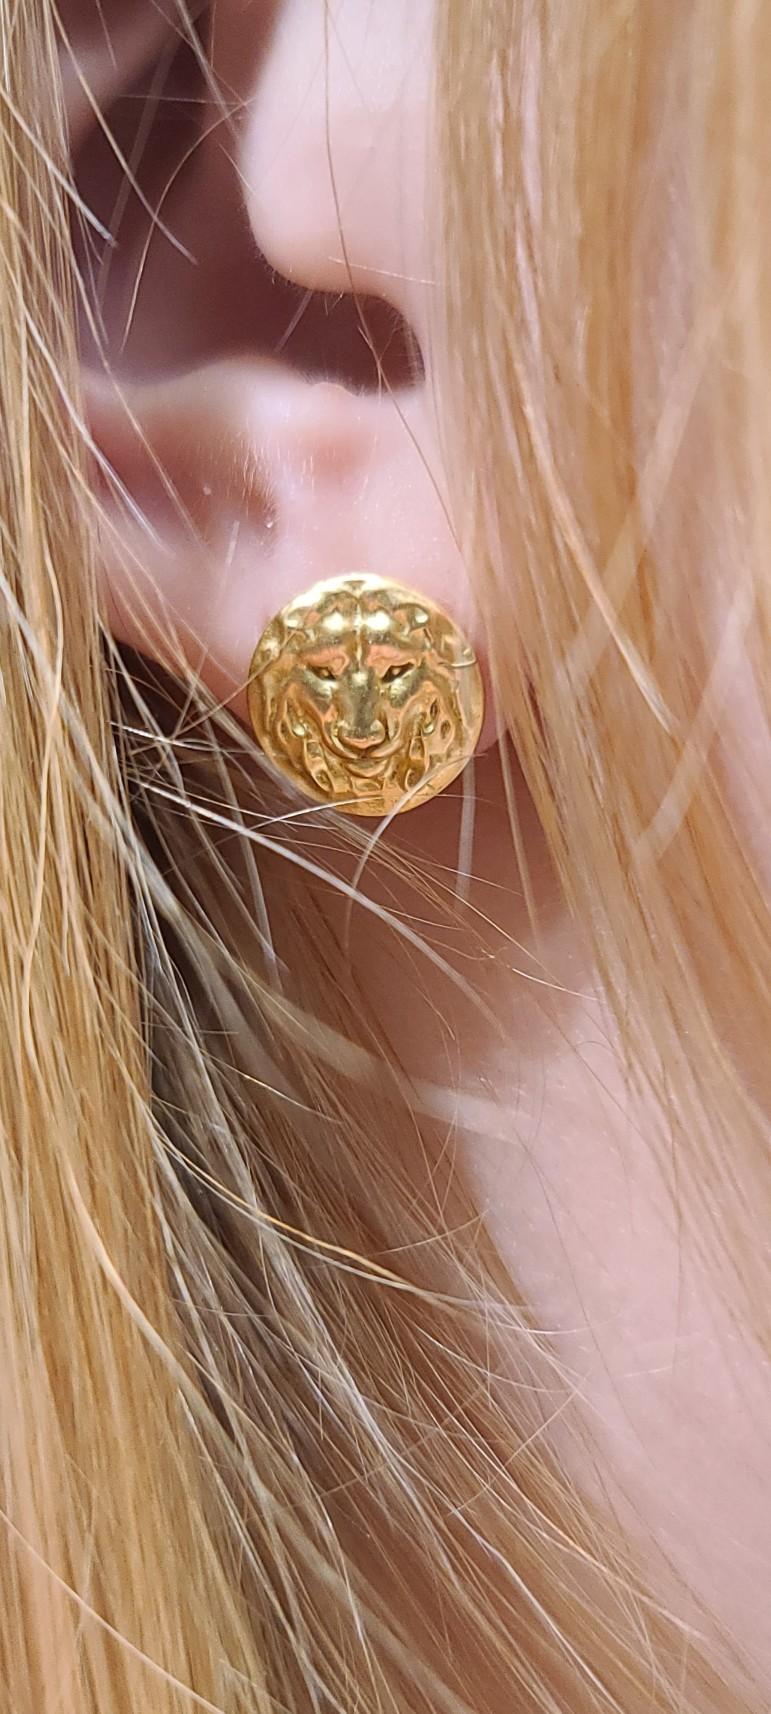 Platinum Lion Pierced  Stud Earrings, The king of the jungle made especially for the ears now! Absolutely fearless.  Can you hear the roar?  High polish finish , 11.5 mm or 3/8th inch diameter.  Made to order in NYC , please allow  3 weeks.
